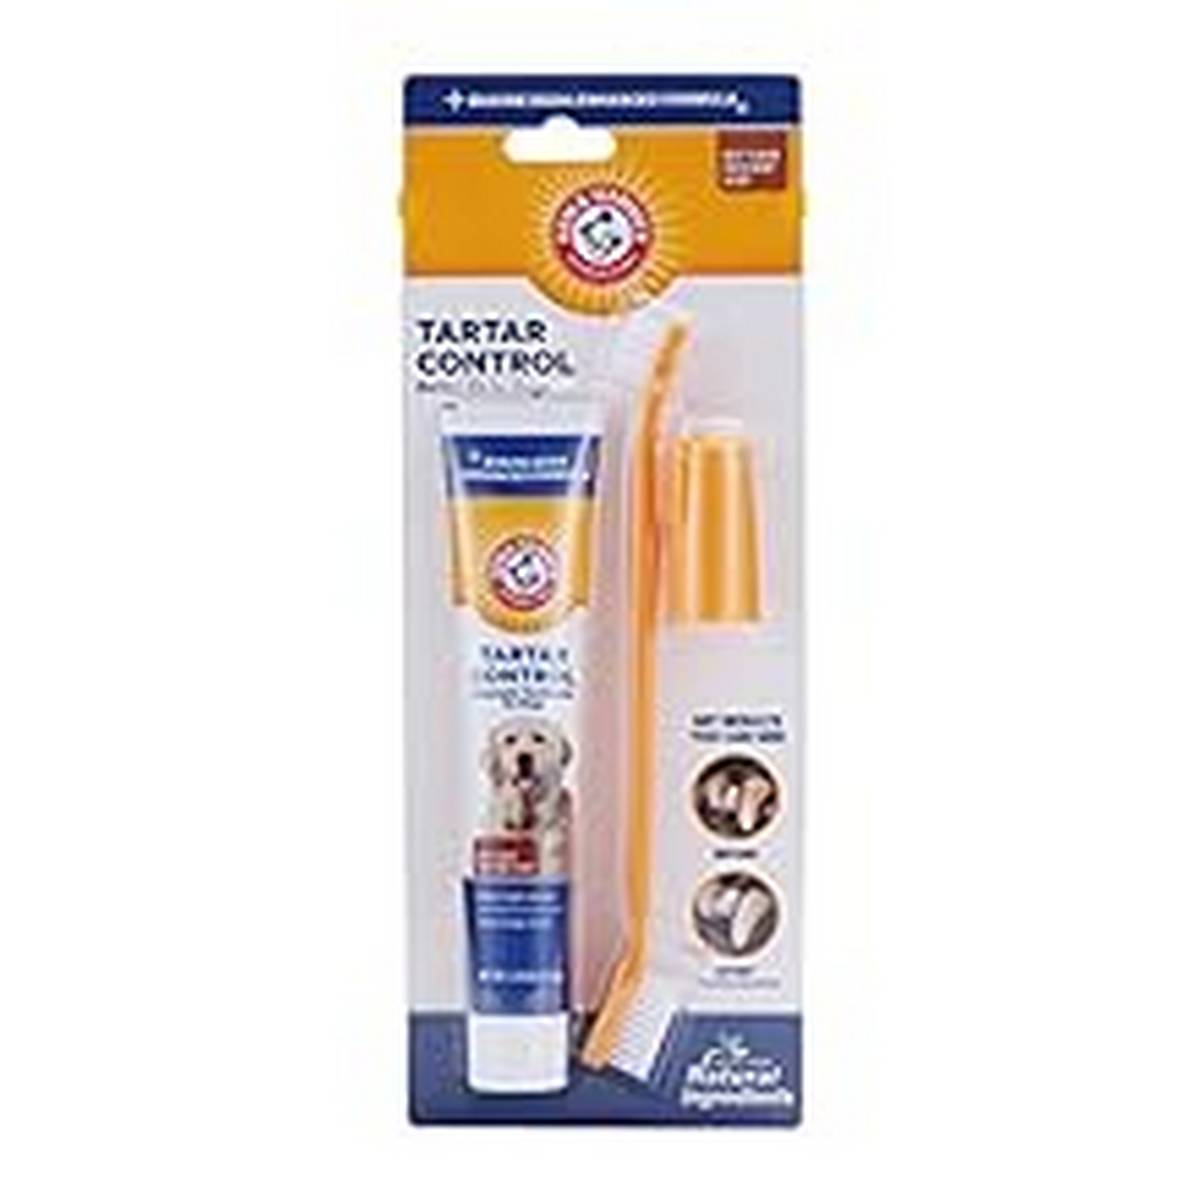 Supplies_Arm & Hammer for Pets Tartar Control Kit for Dogs Contains Toothpaste Toothbrush & Fingerbrush Reduces Plaque & Tartar Buildup Safe for Puppies -Piece Beef Flavor